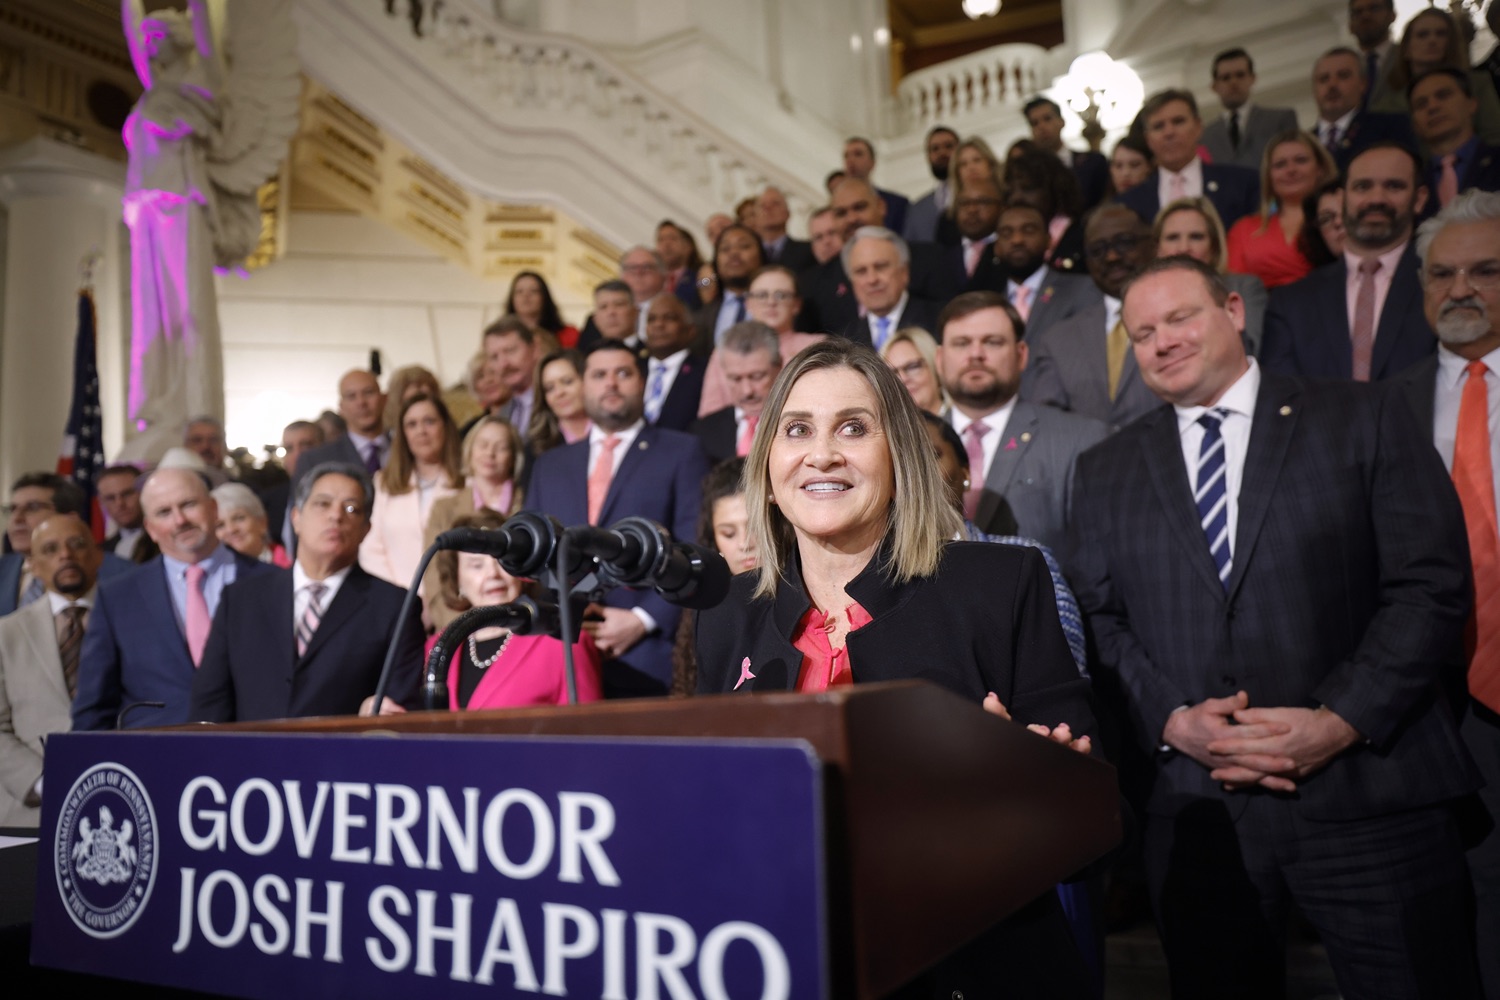 Governor Josh Shapiro signed the first bill of his Administration - Act 1 of 2023, a first-of-its-kind law in the nation that will require insurers to cover preventive breast and ovarian cancer screenings for high-risk women at no cost. MAY 01, 2023 - HARRISBURG, PA<br><a href="https://filesource.amperwave.net/commonwealthofpa/photo/23041_gov_sb8_dz_009.JPG" target="_blank">⇣ Download Photo</a>